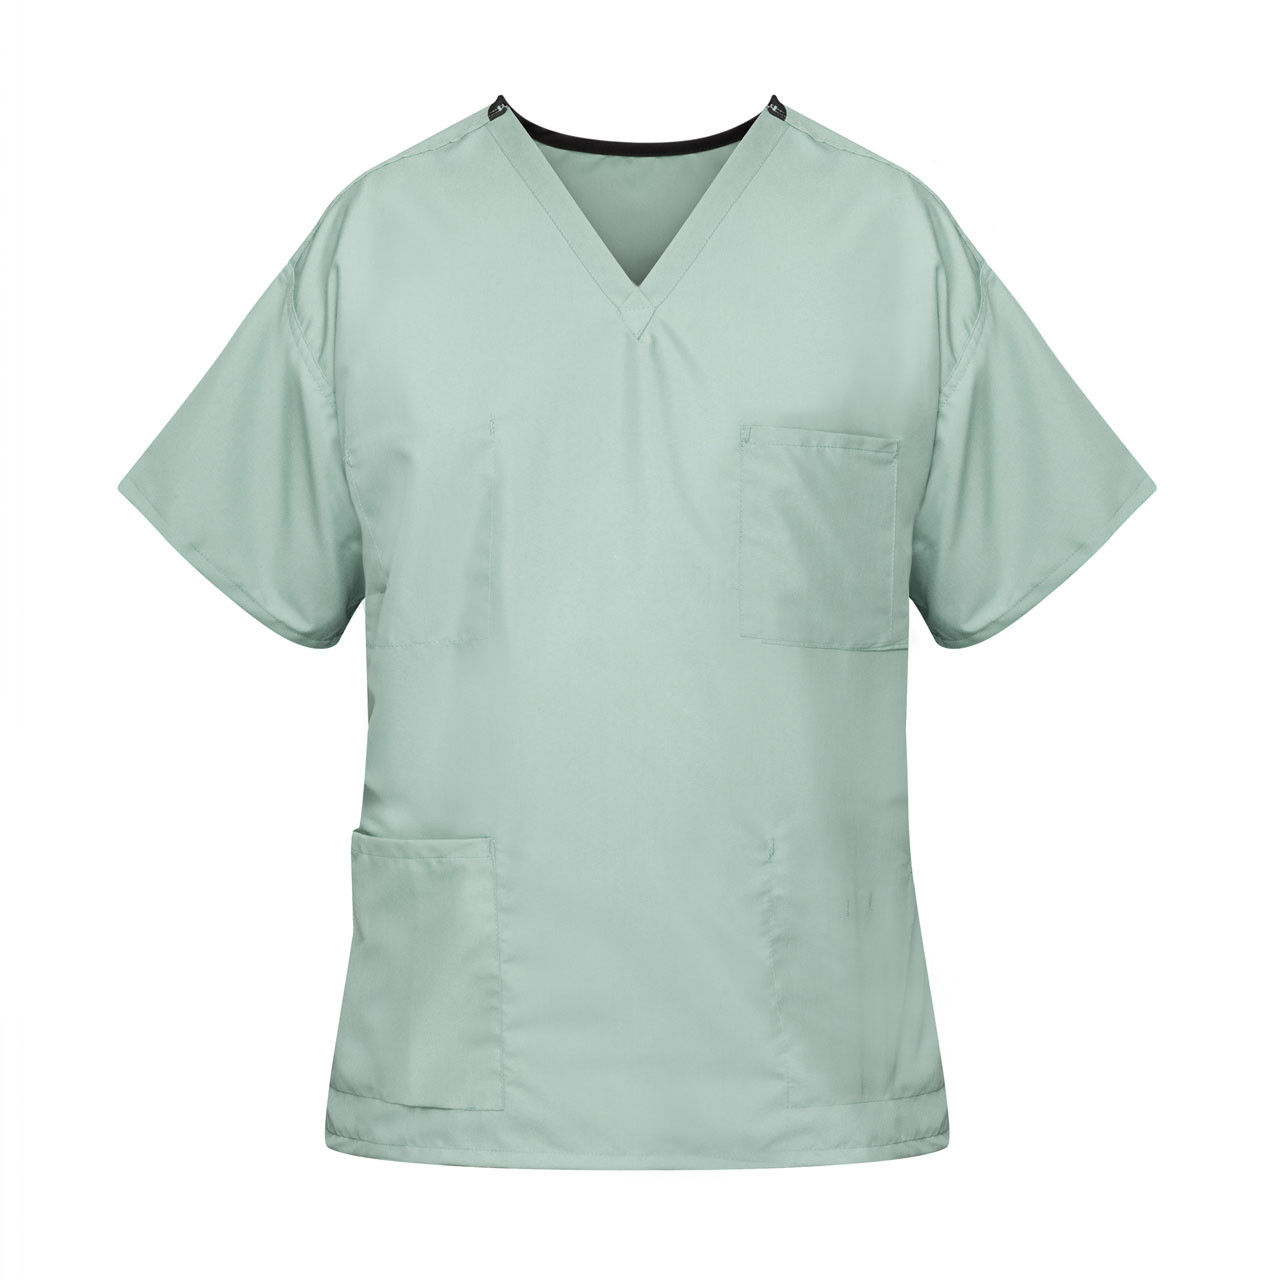 How is the color coding of neck bindings in the misty green scrubs?